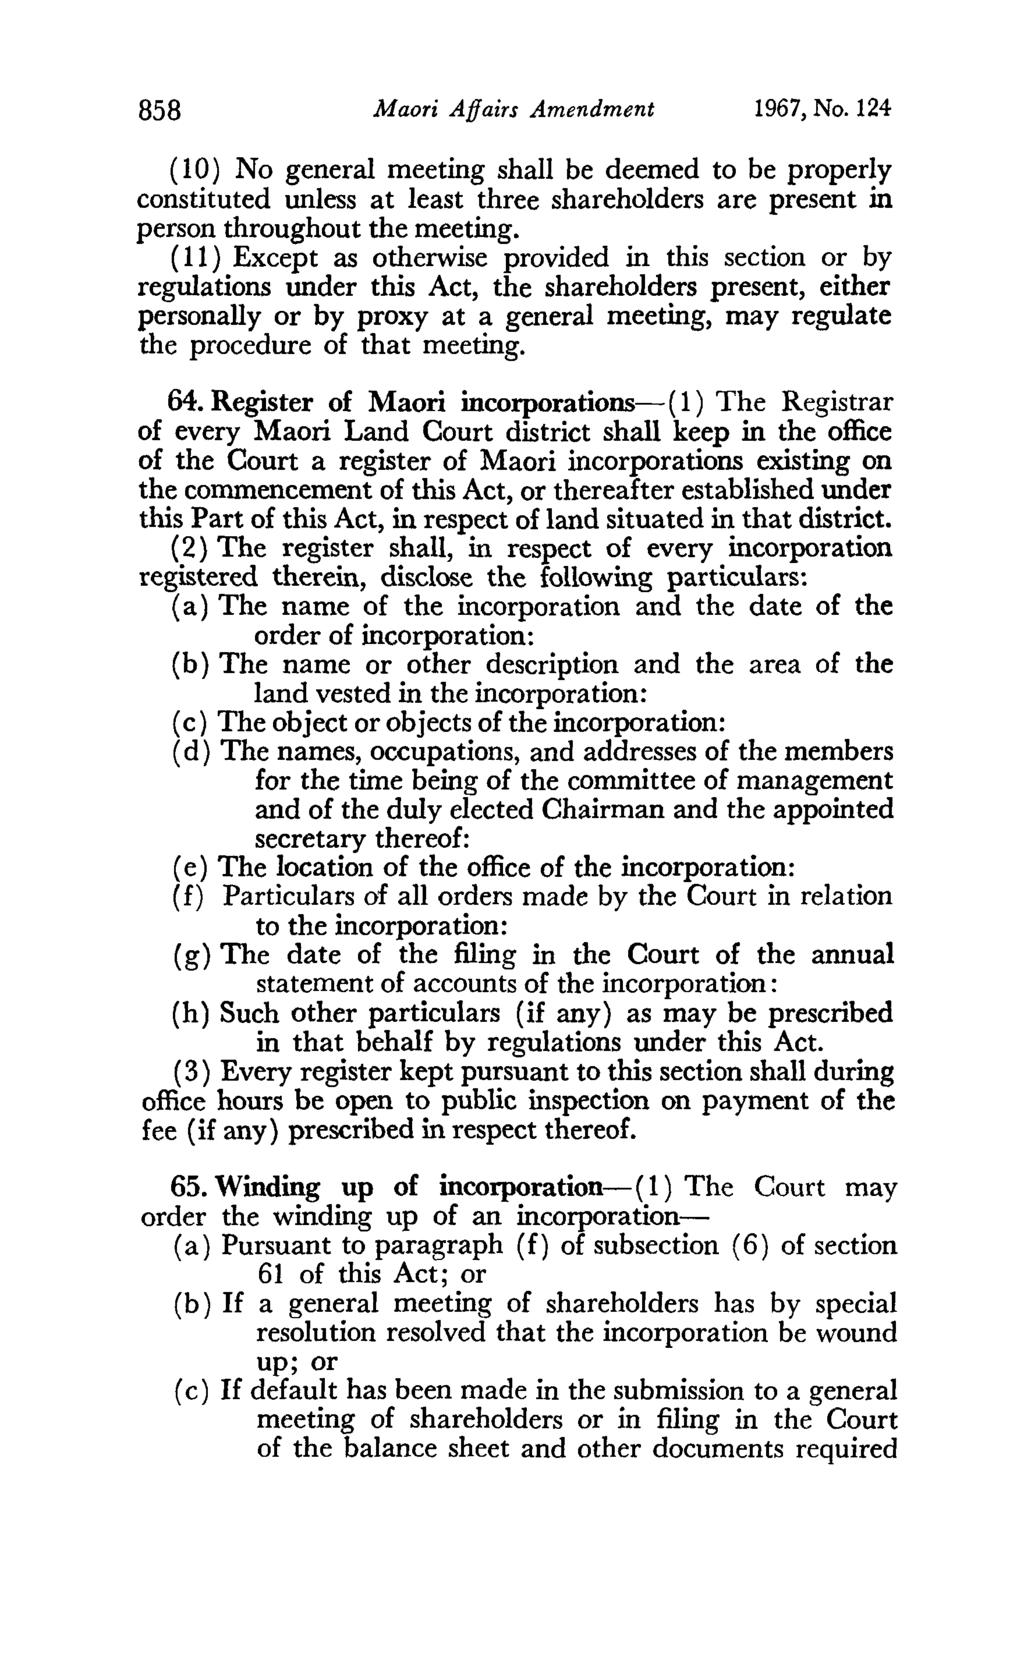 858 Maori Affairs Amendment 1967, No. 124 (10) No general meeting shall be deemed to be properly constituted unless at least three shareholders are present in person throughout the meeting.